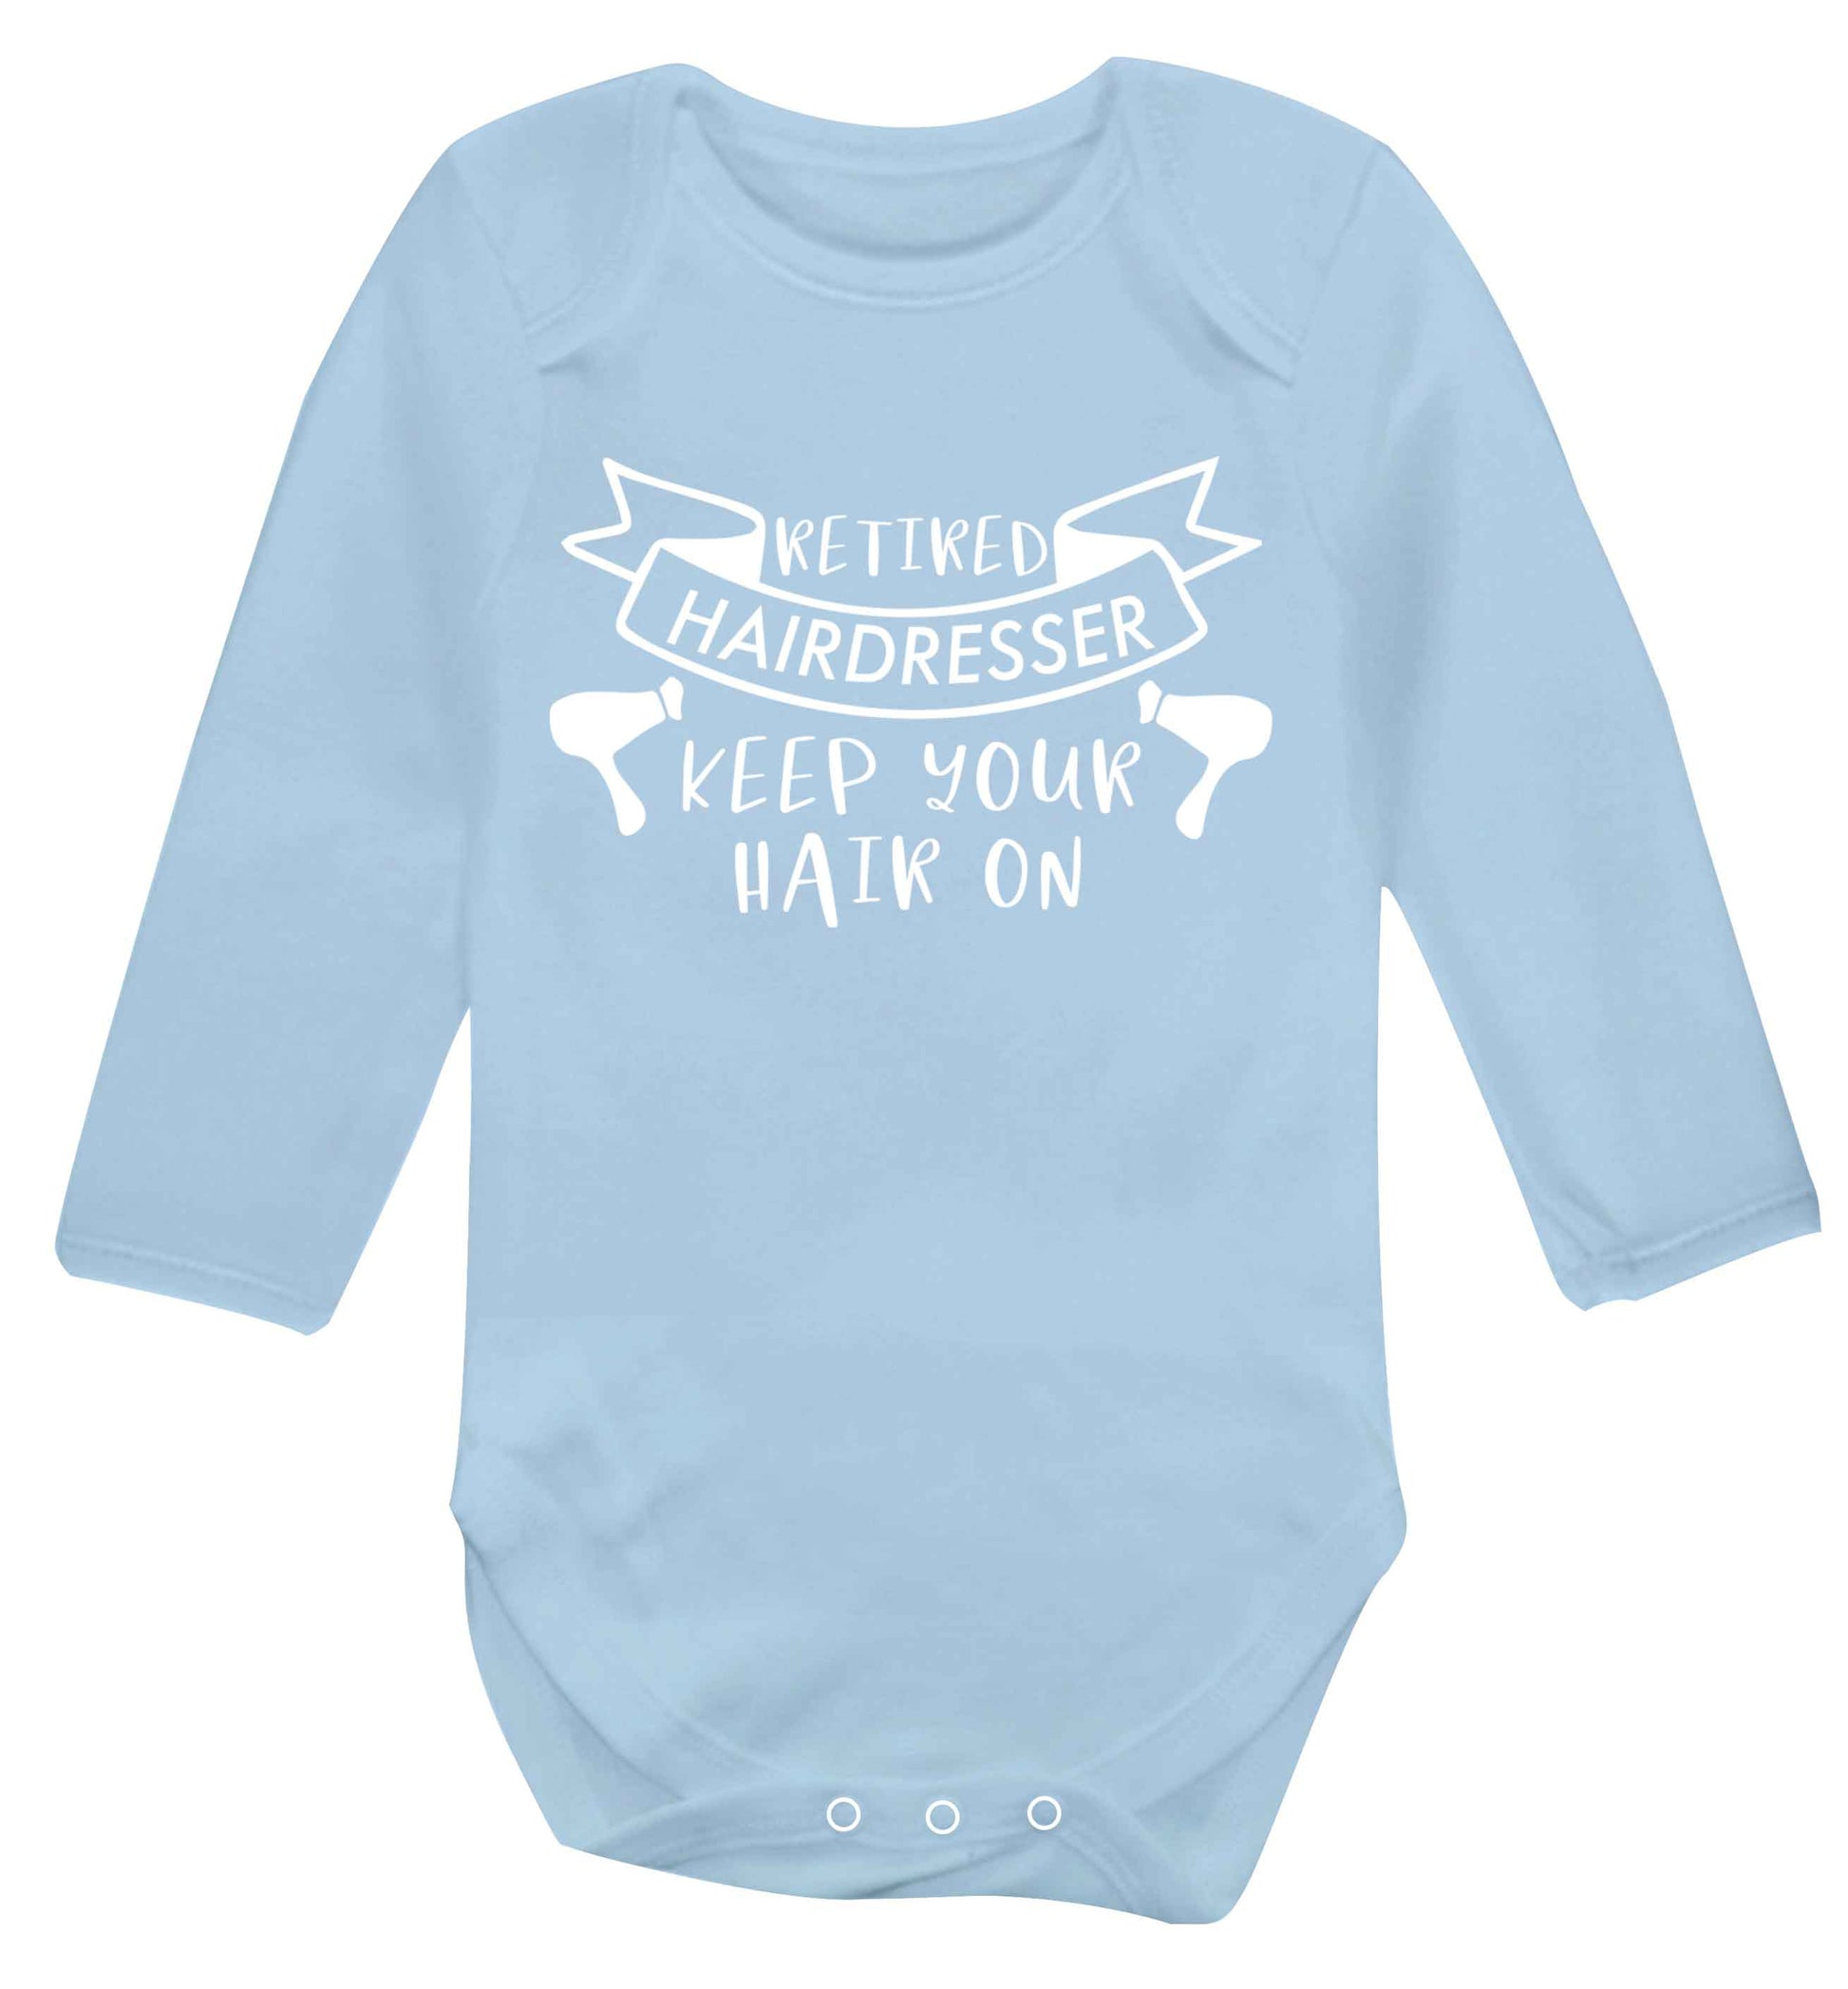 Retired hairdresser keep your hair on Baby Vest long sleeved pale blue 6-12 months